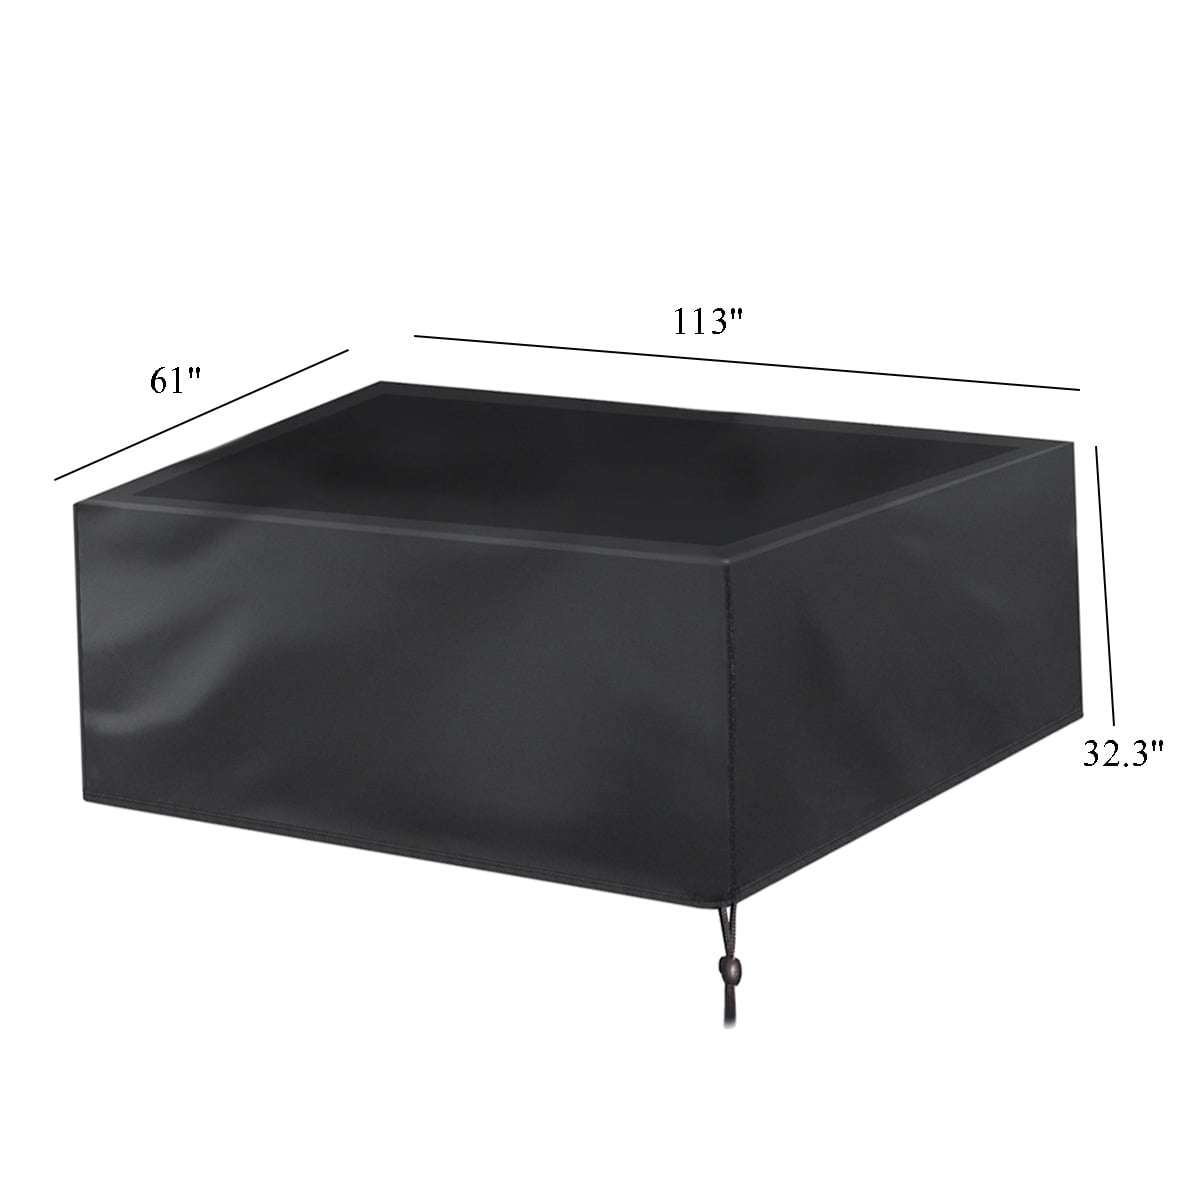 Tennis ping pong Noir Full Size Table Cover Indoor/Outdoor imperméable 